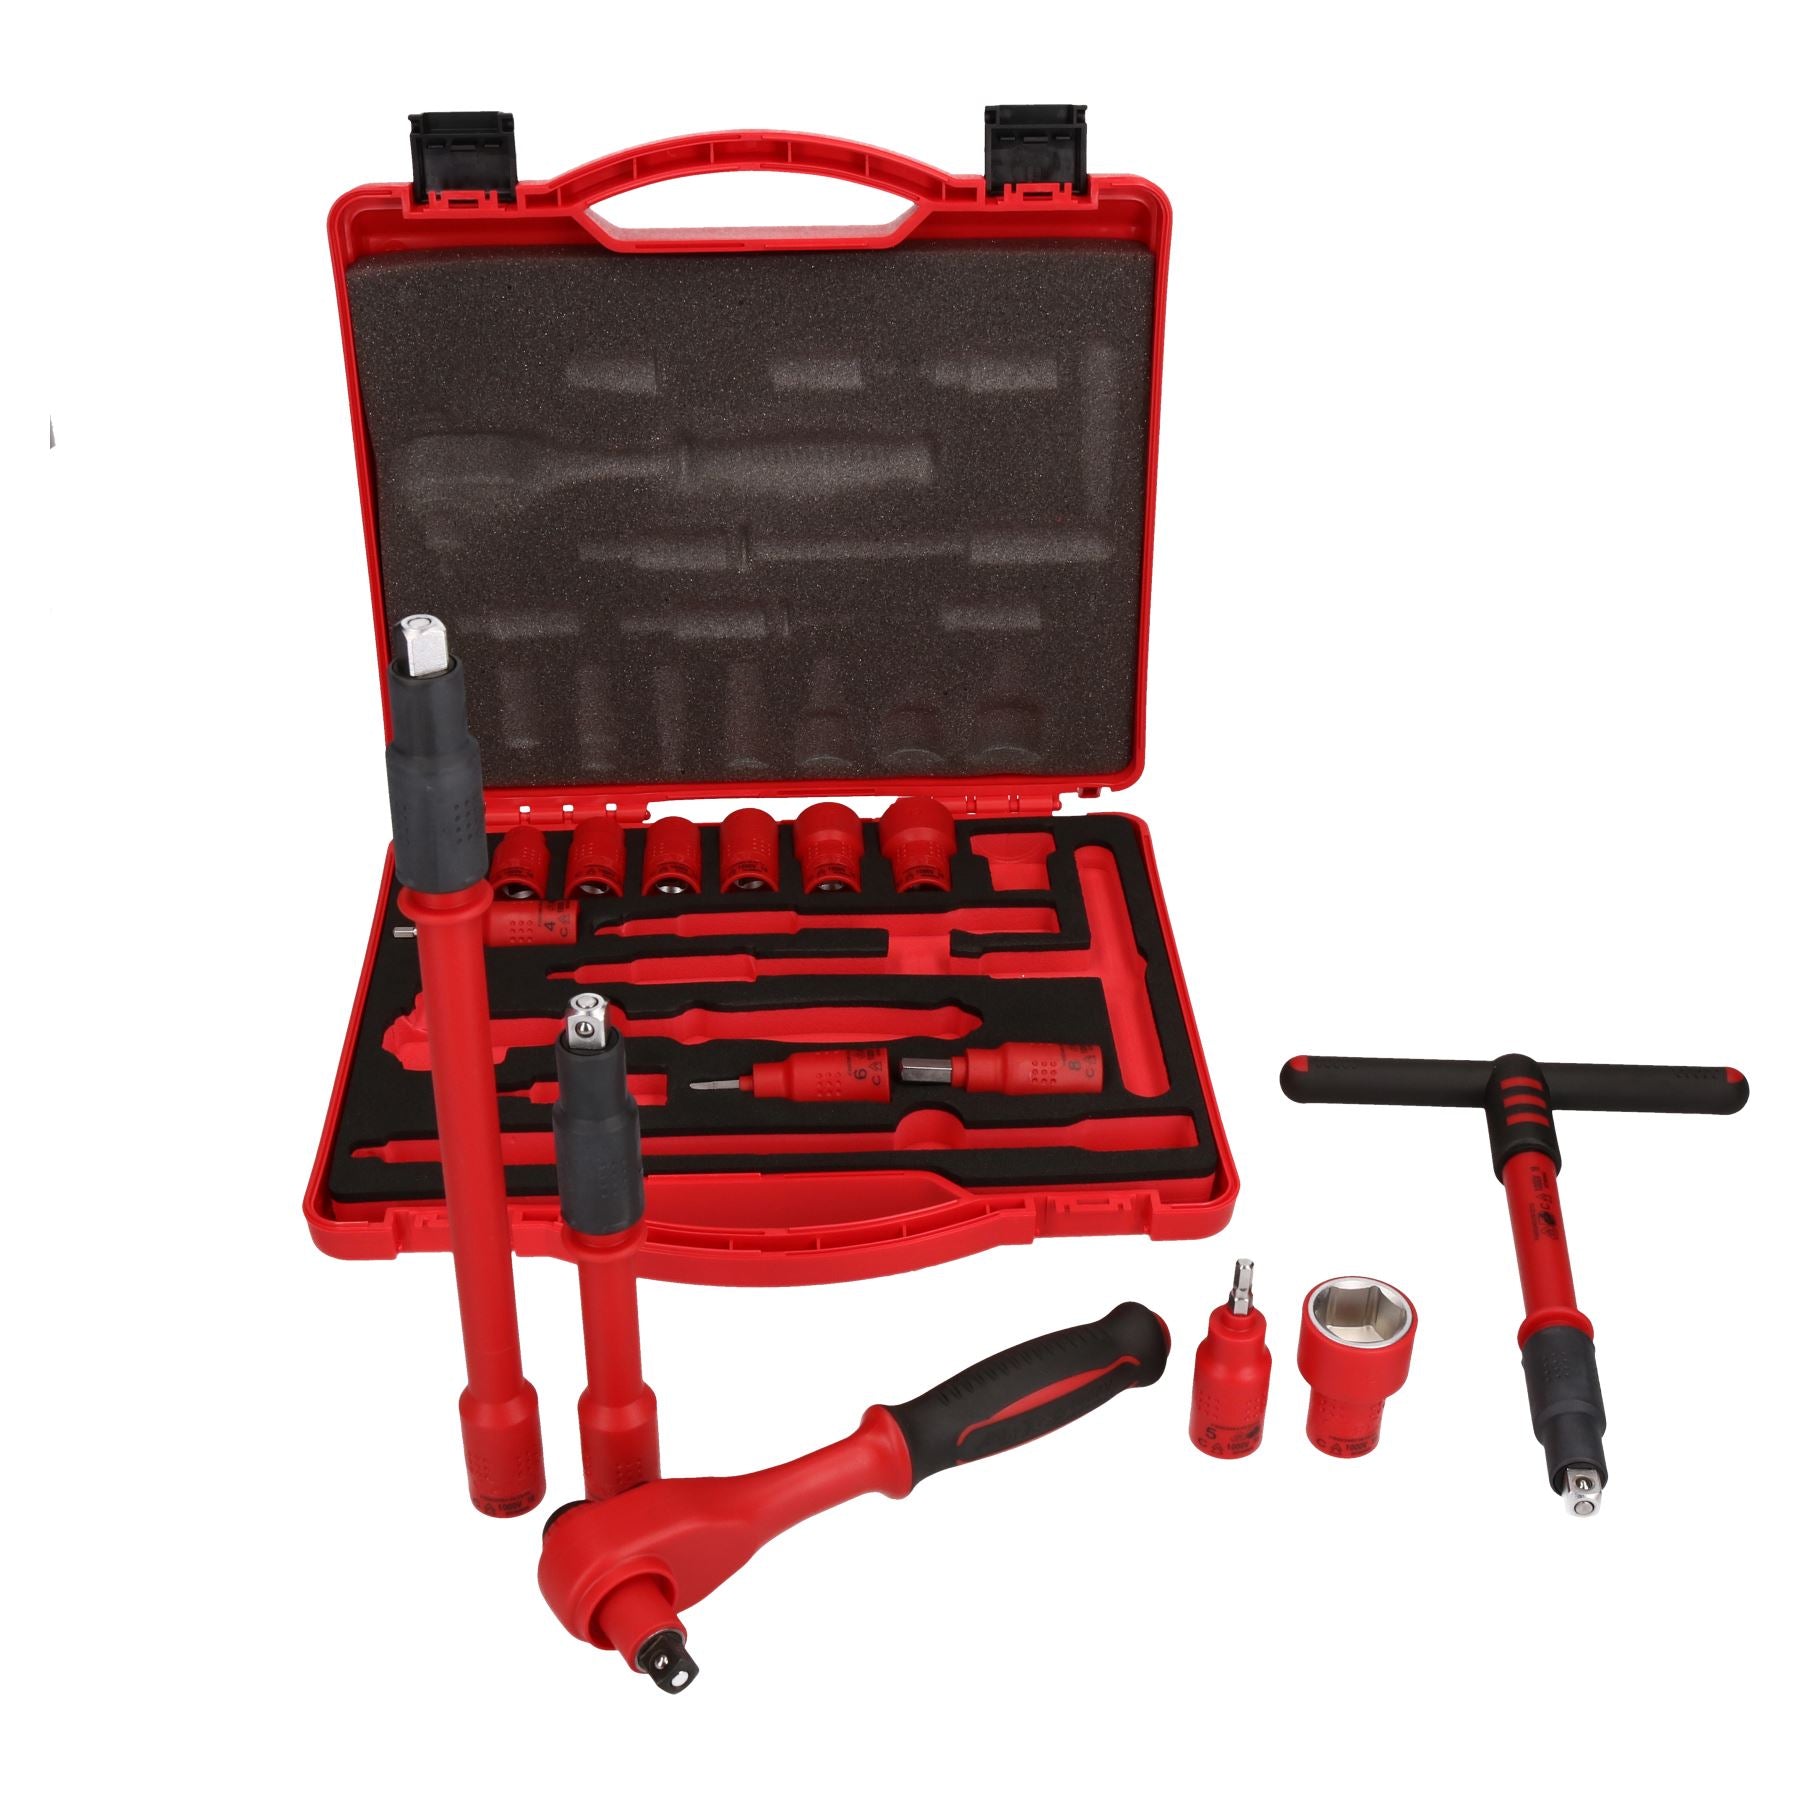 3/8" Drive Insulated VDE Tool Socket and Accessory Kit 16pc Metric Hex + T Bar